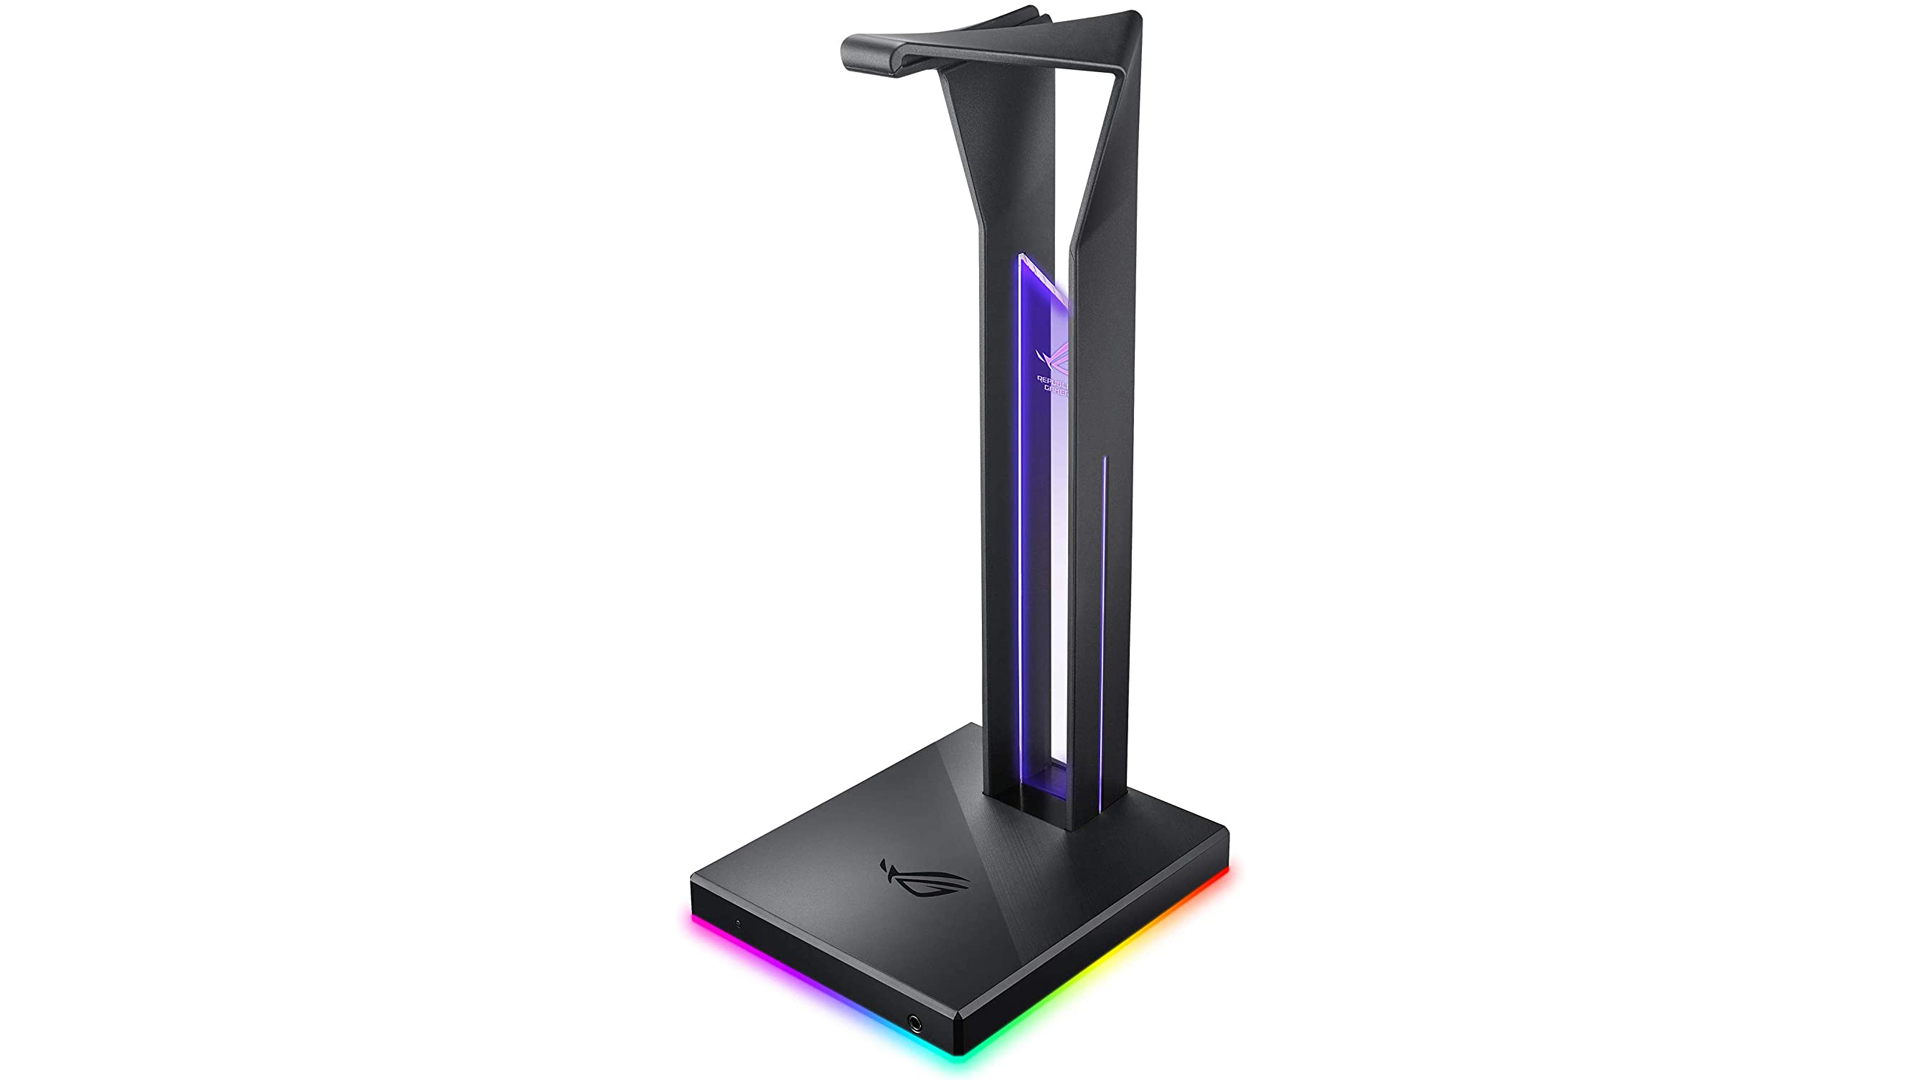 Product image of a Asus ROG Throne headphone stand on a white background